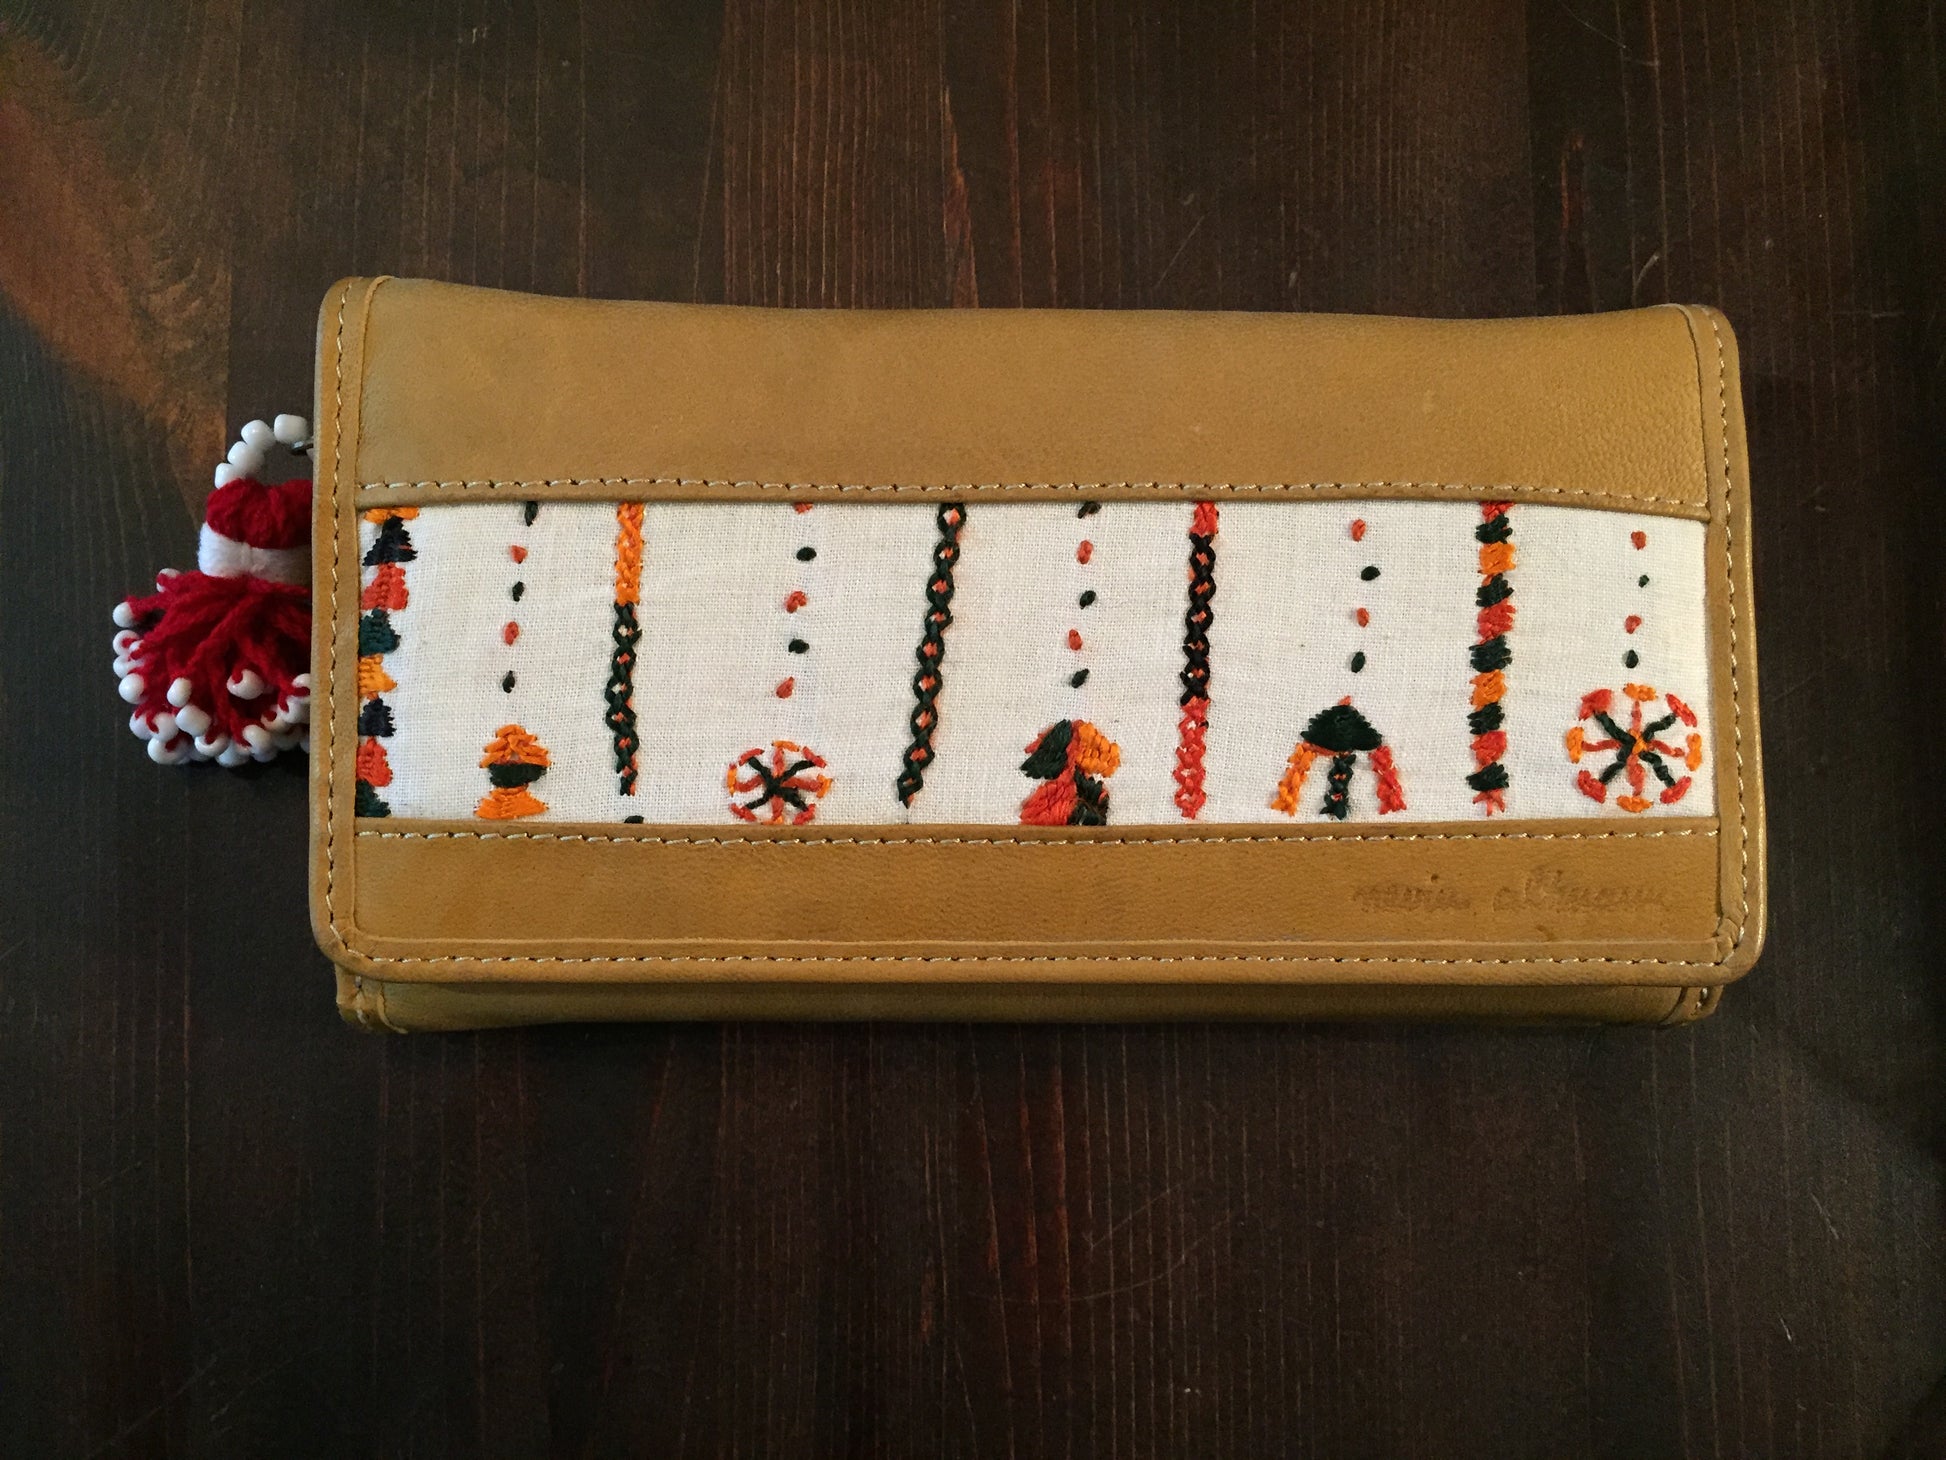 Handmade Leather Wallet with Hand Embroidery - Large - Dandarah